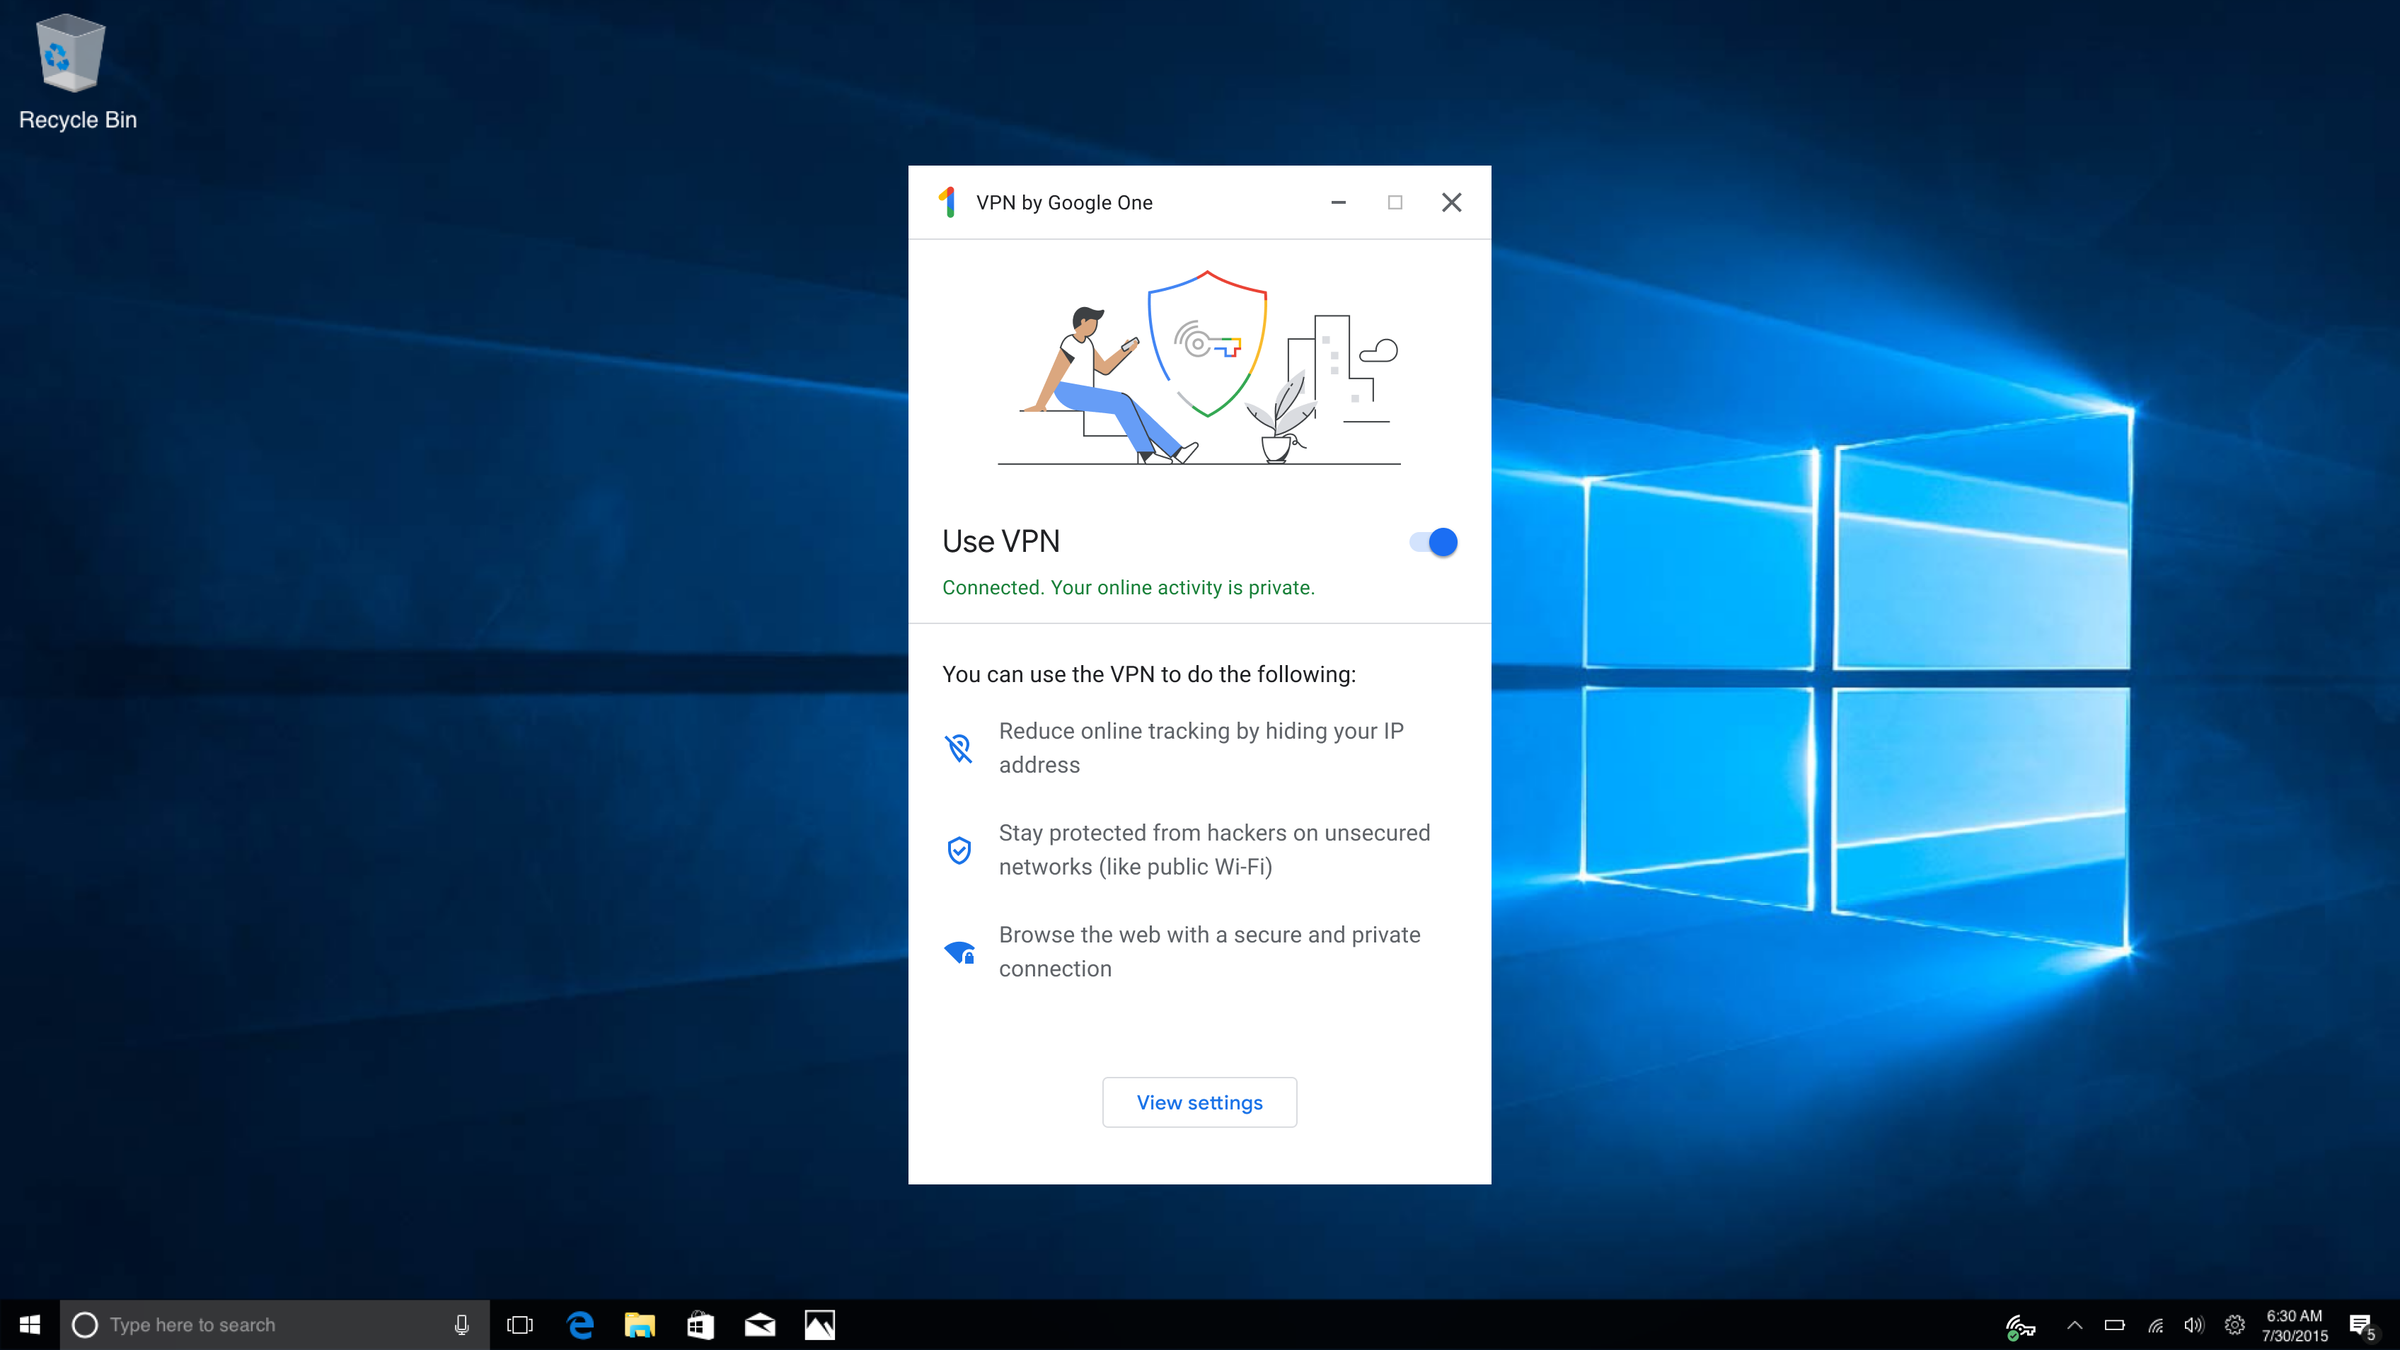 Google now has a desktop app for its VPN on Windows and macOS